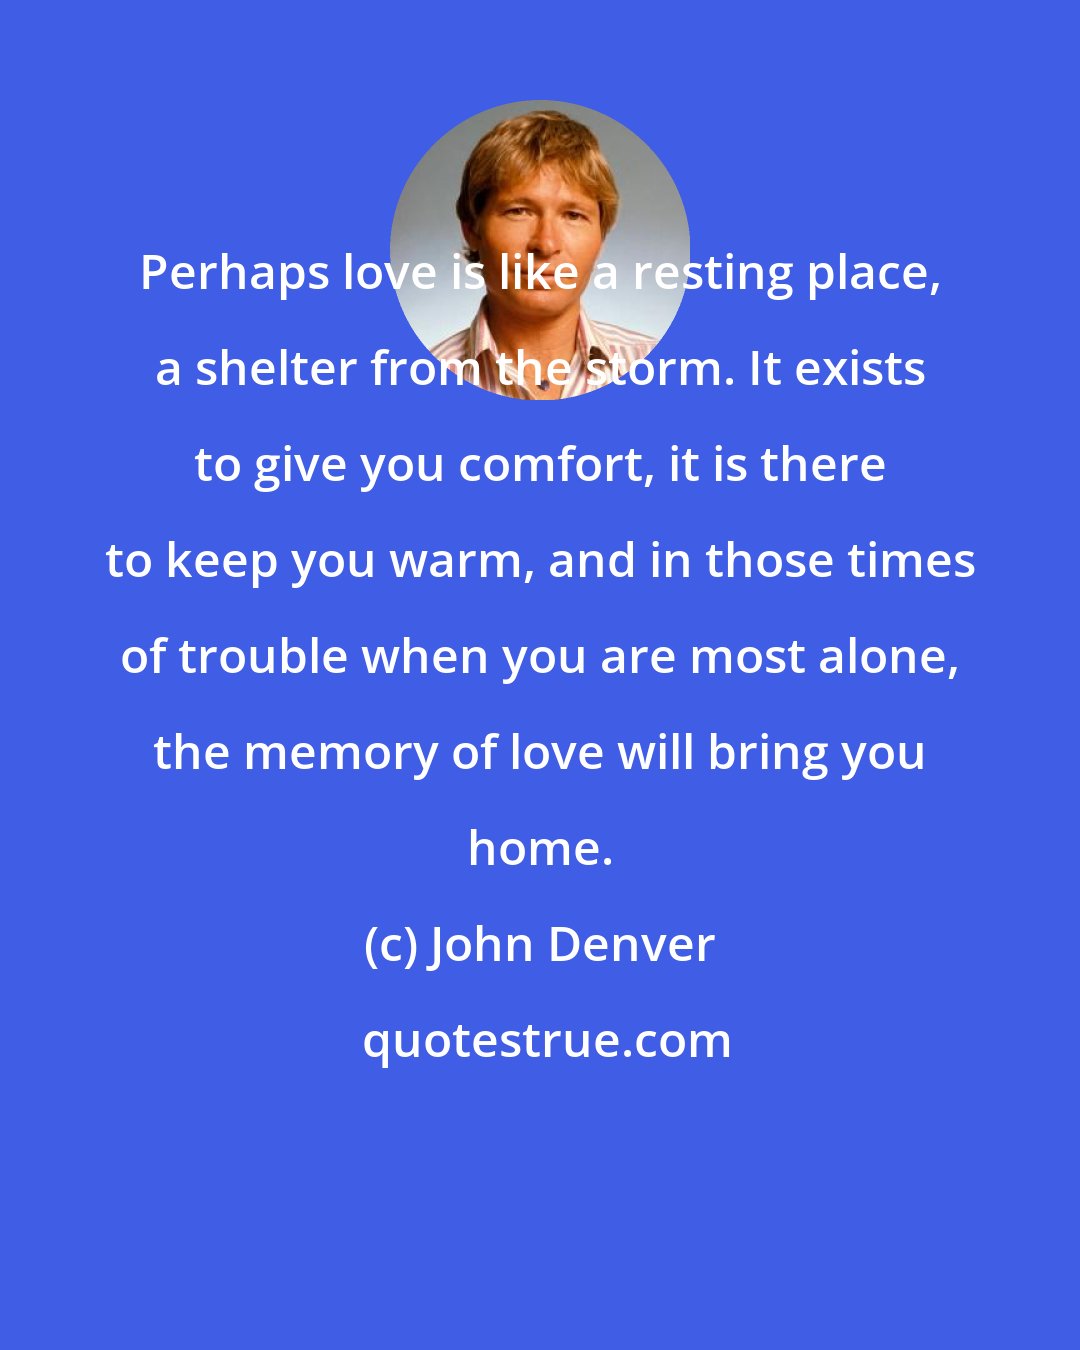 John Denver: Perhaps love is like a resting place, a shelter from the storm. It exists to give you comfort, it is there to keep you warm, and in those times of trouble when you are most alone, the memory of love will bring you home.